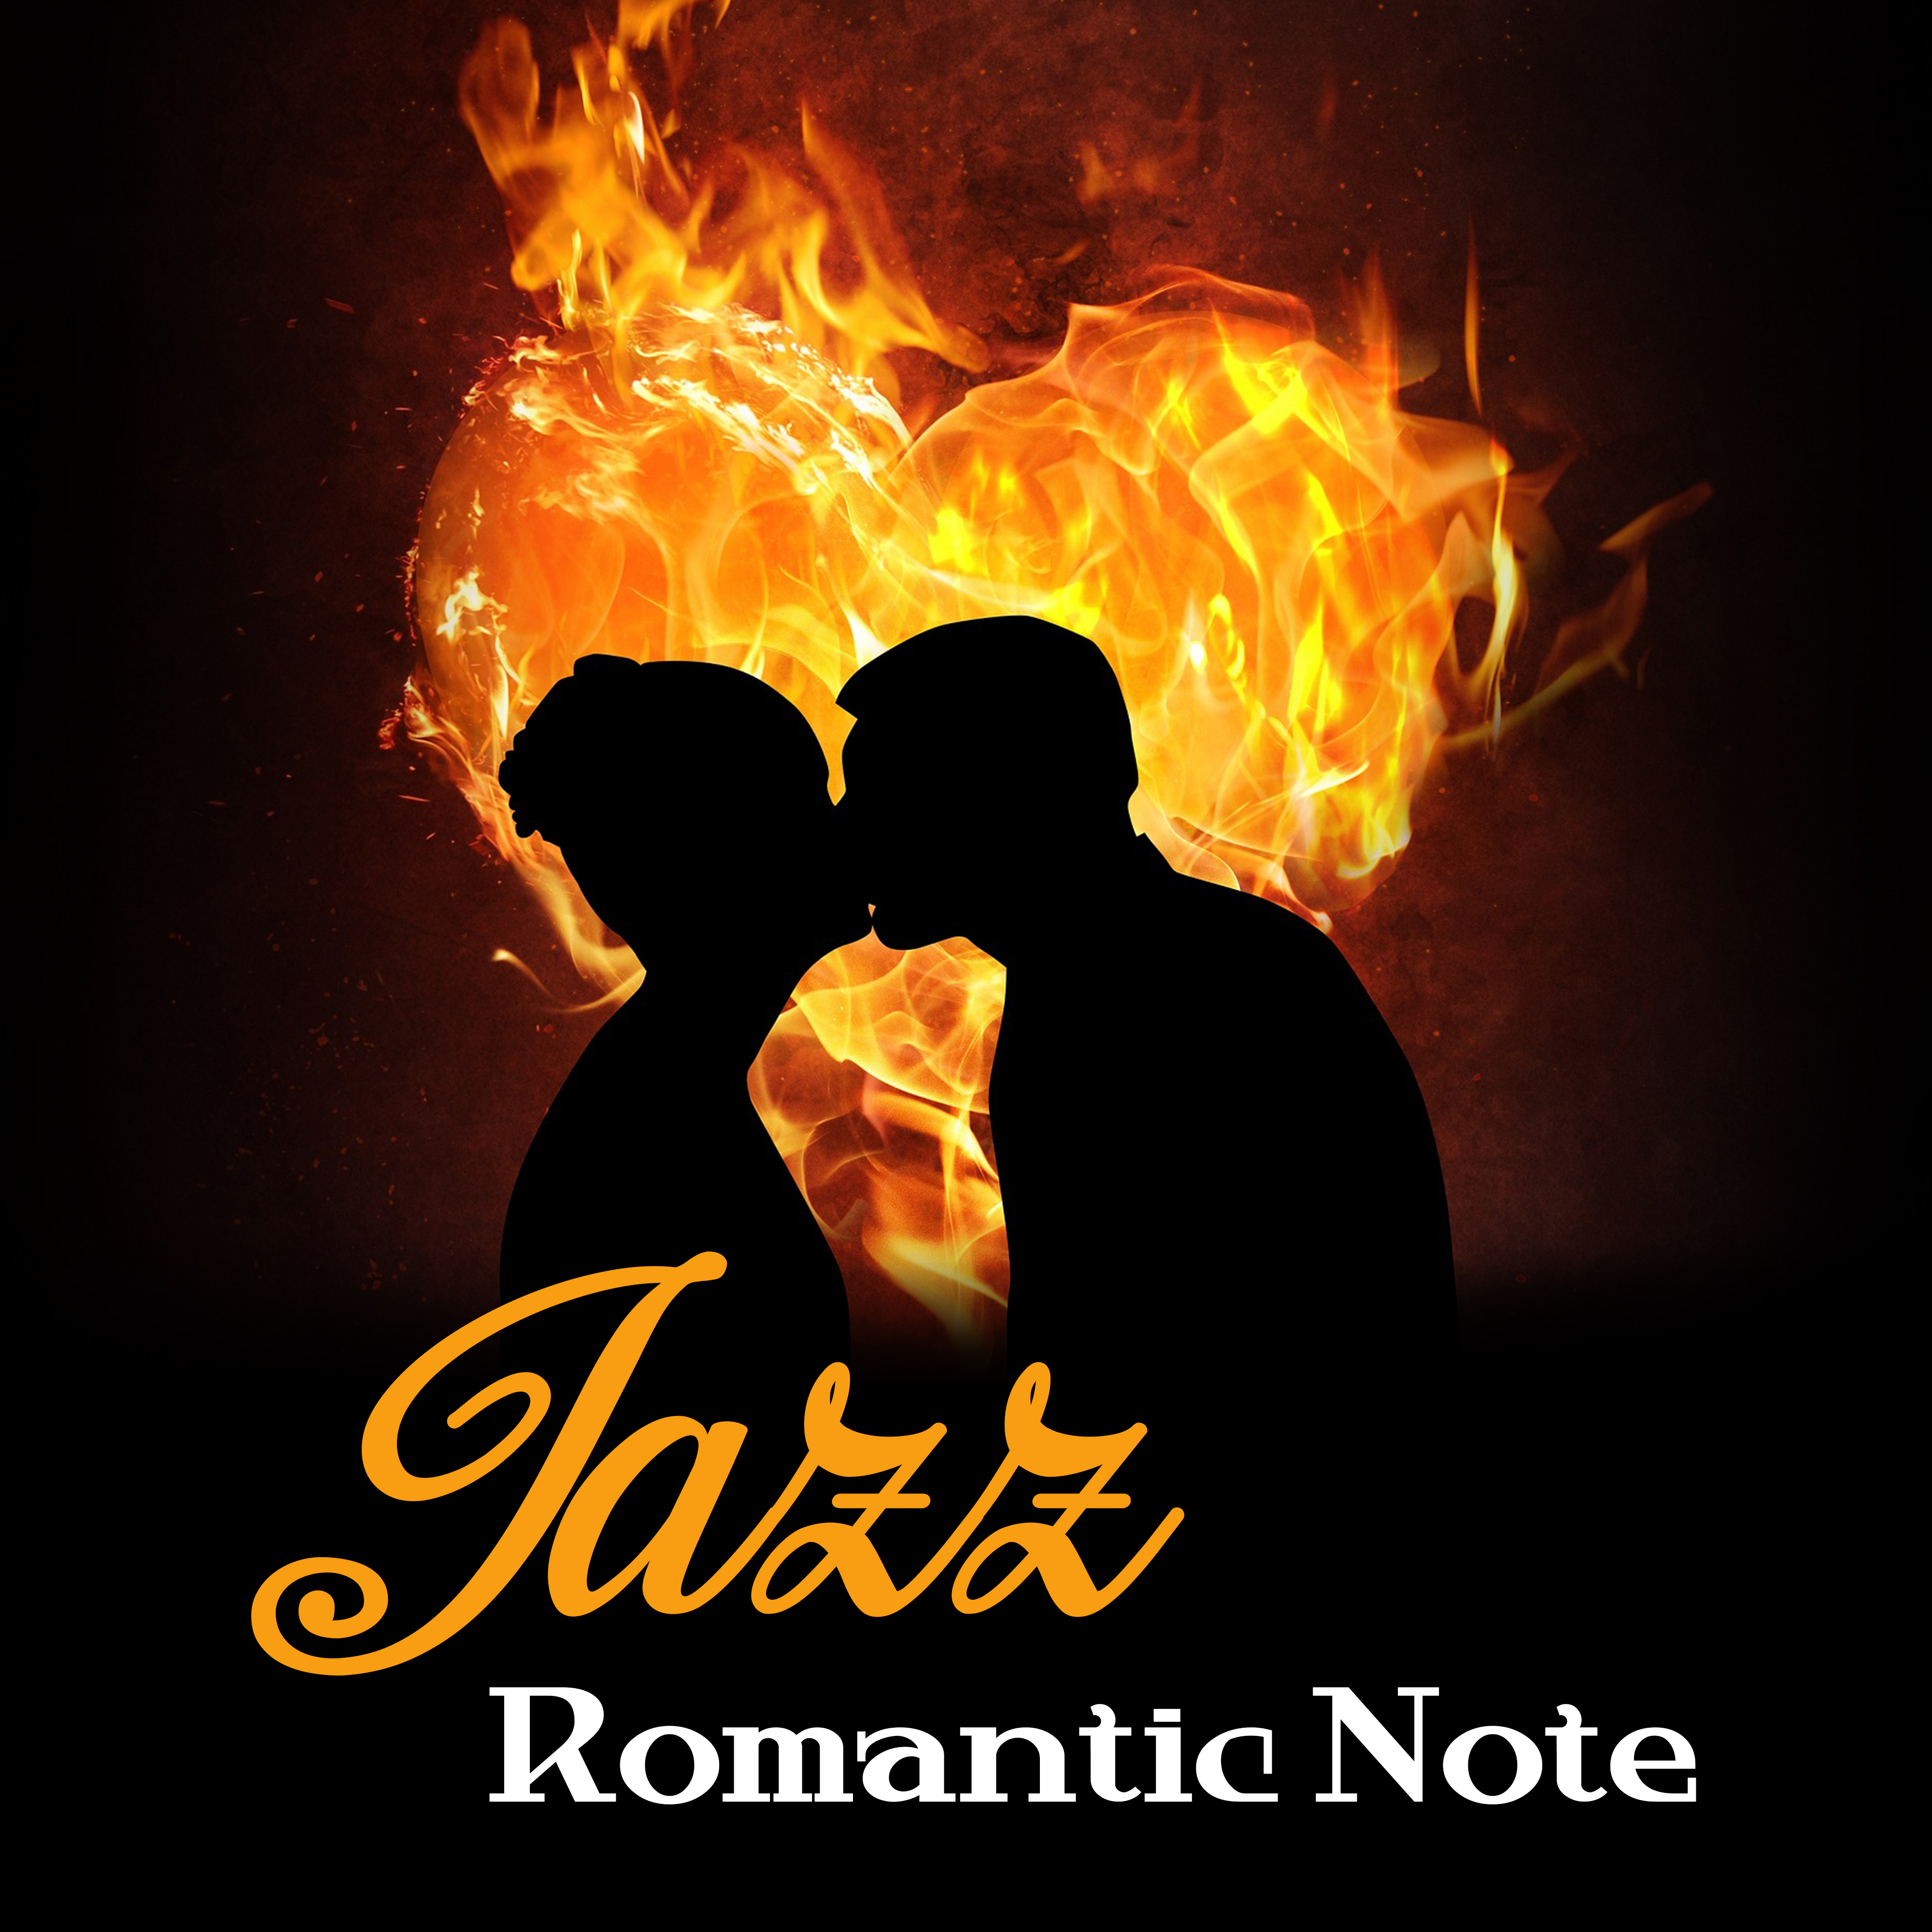 Jazz Romantic Note  Smooth Sounds of Jazz, Romantic Background Sounds for Lovers, Piano Jazz Relaxation